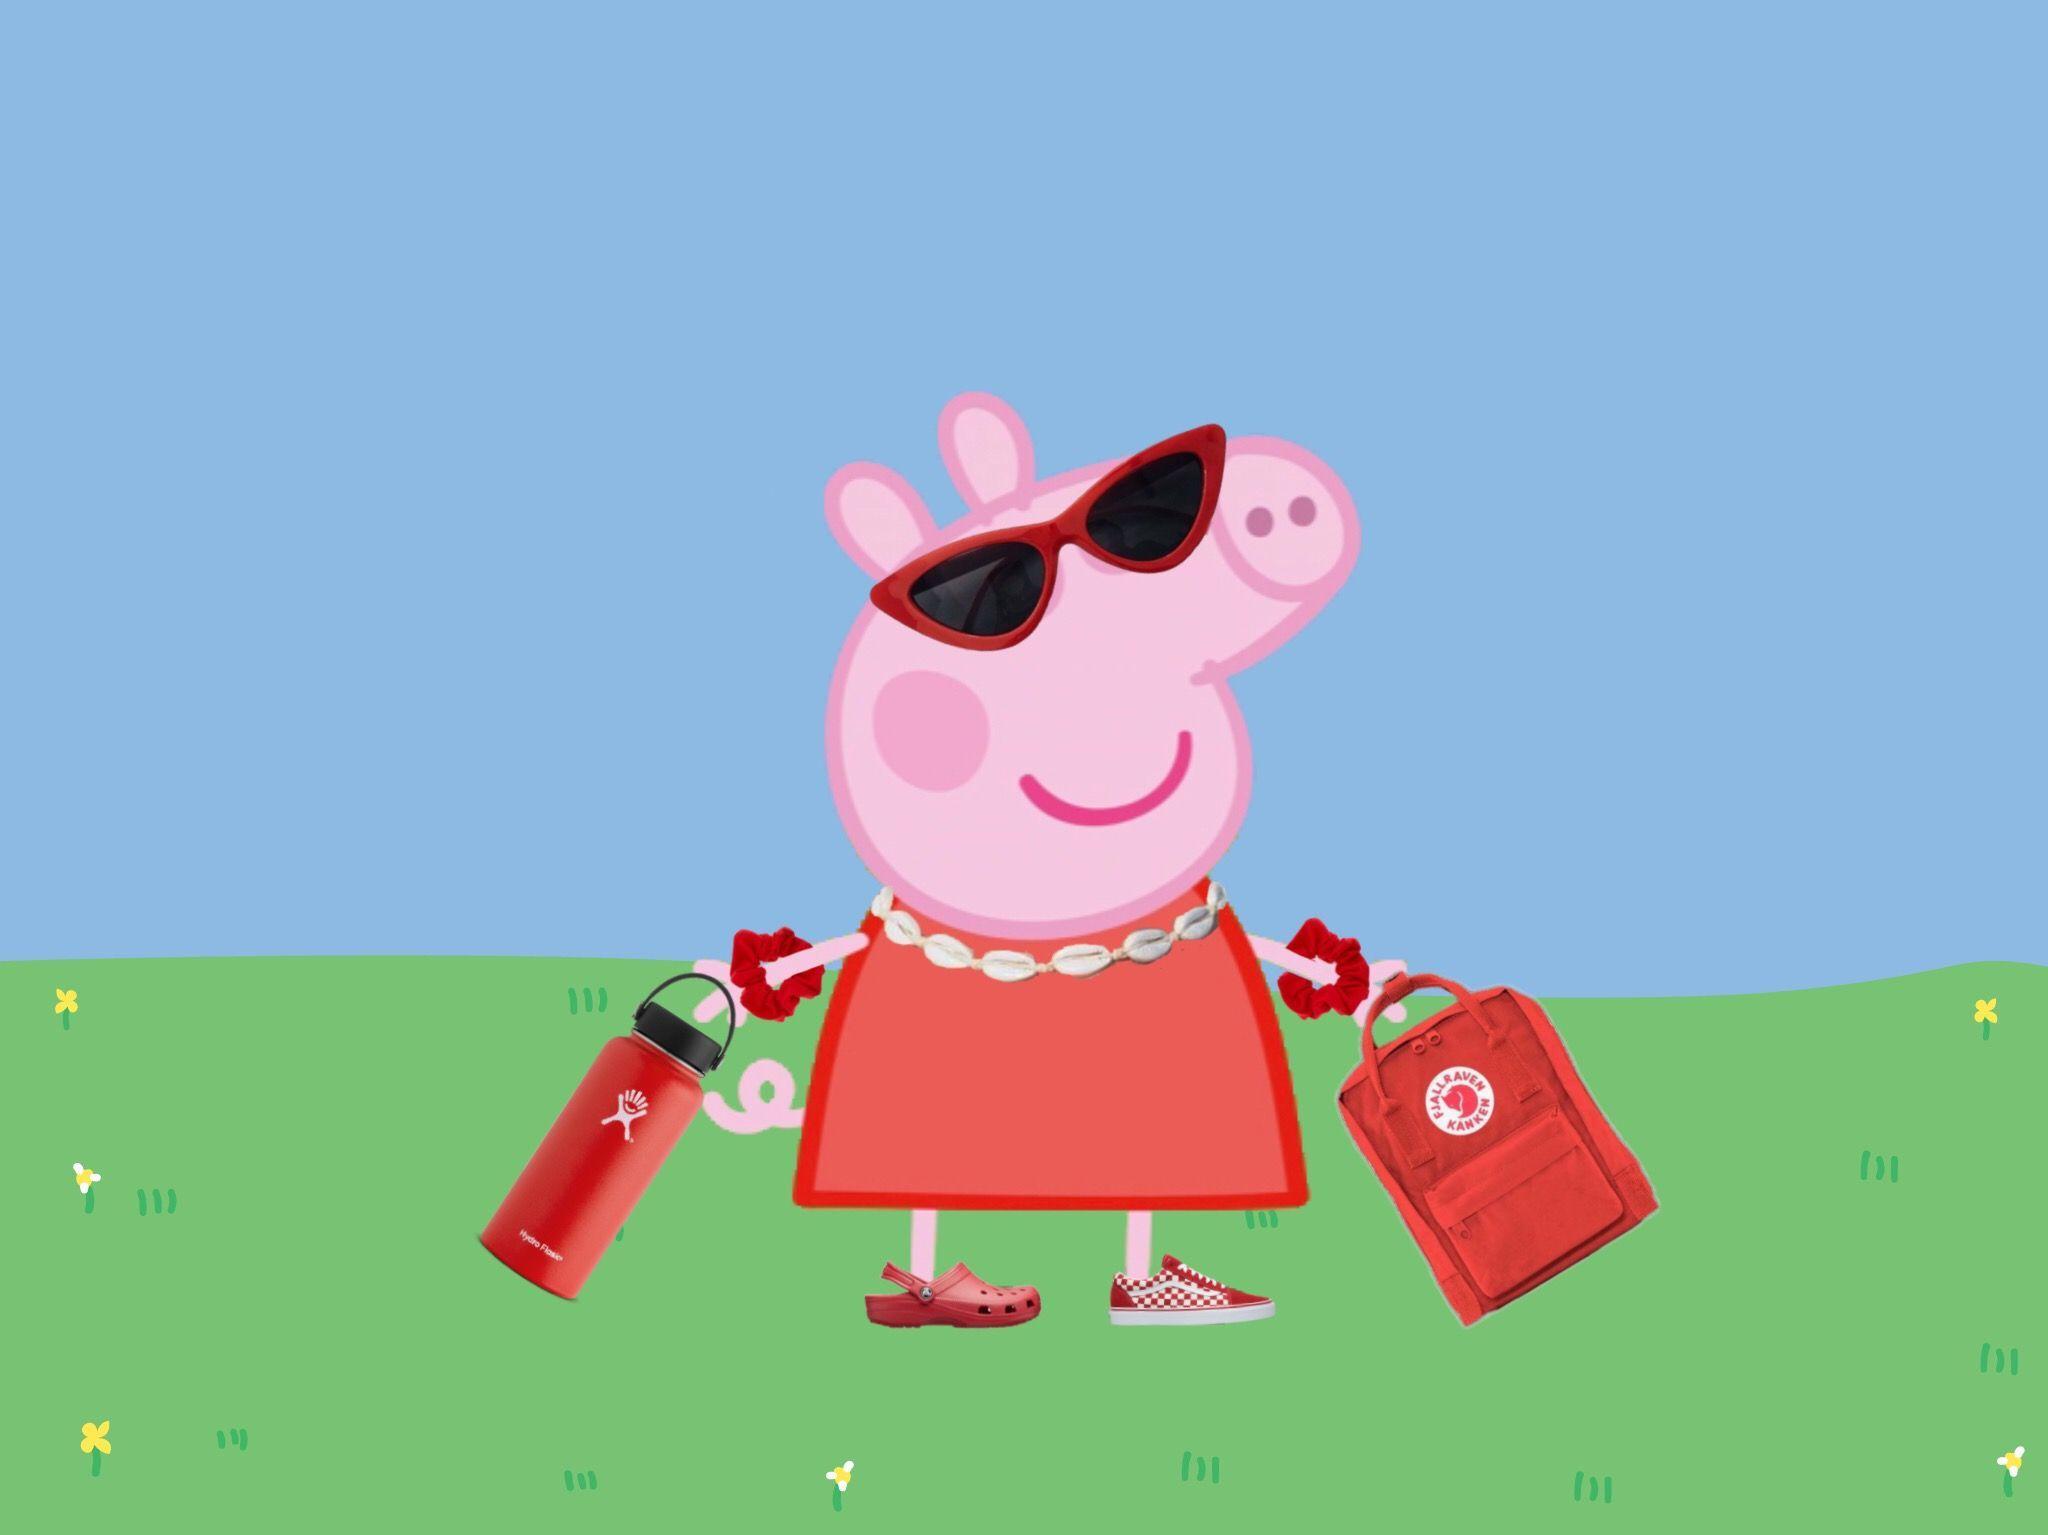 Peppa Pig House Wallpaper Discover more Anime, Cartoon, Peppa Pig, Peppa Pig  House wallpaper.